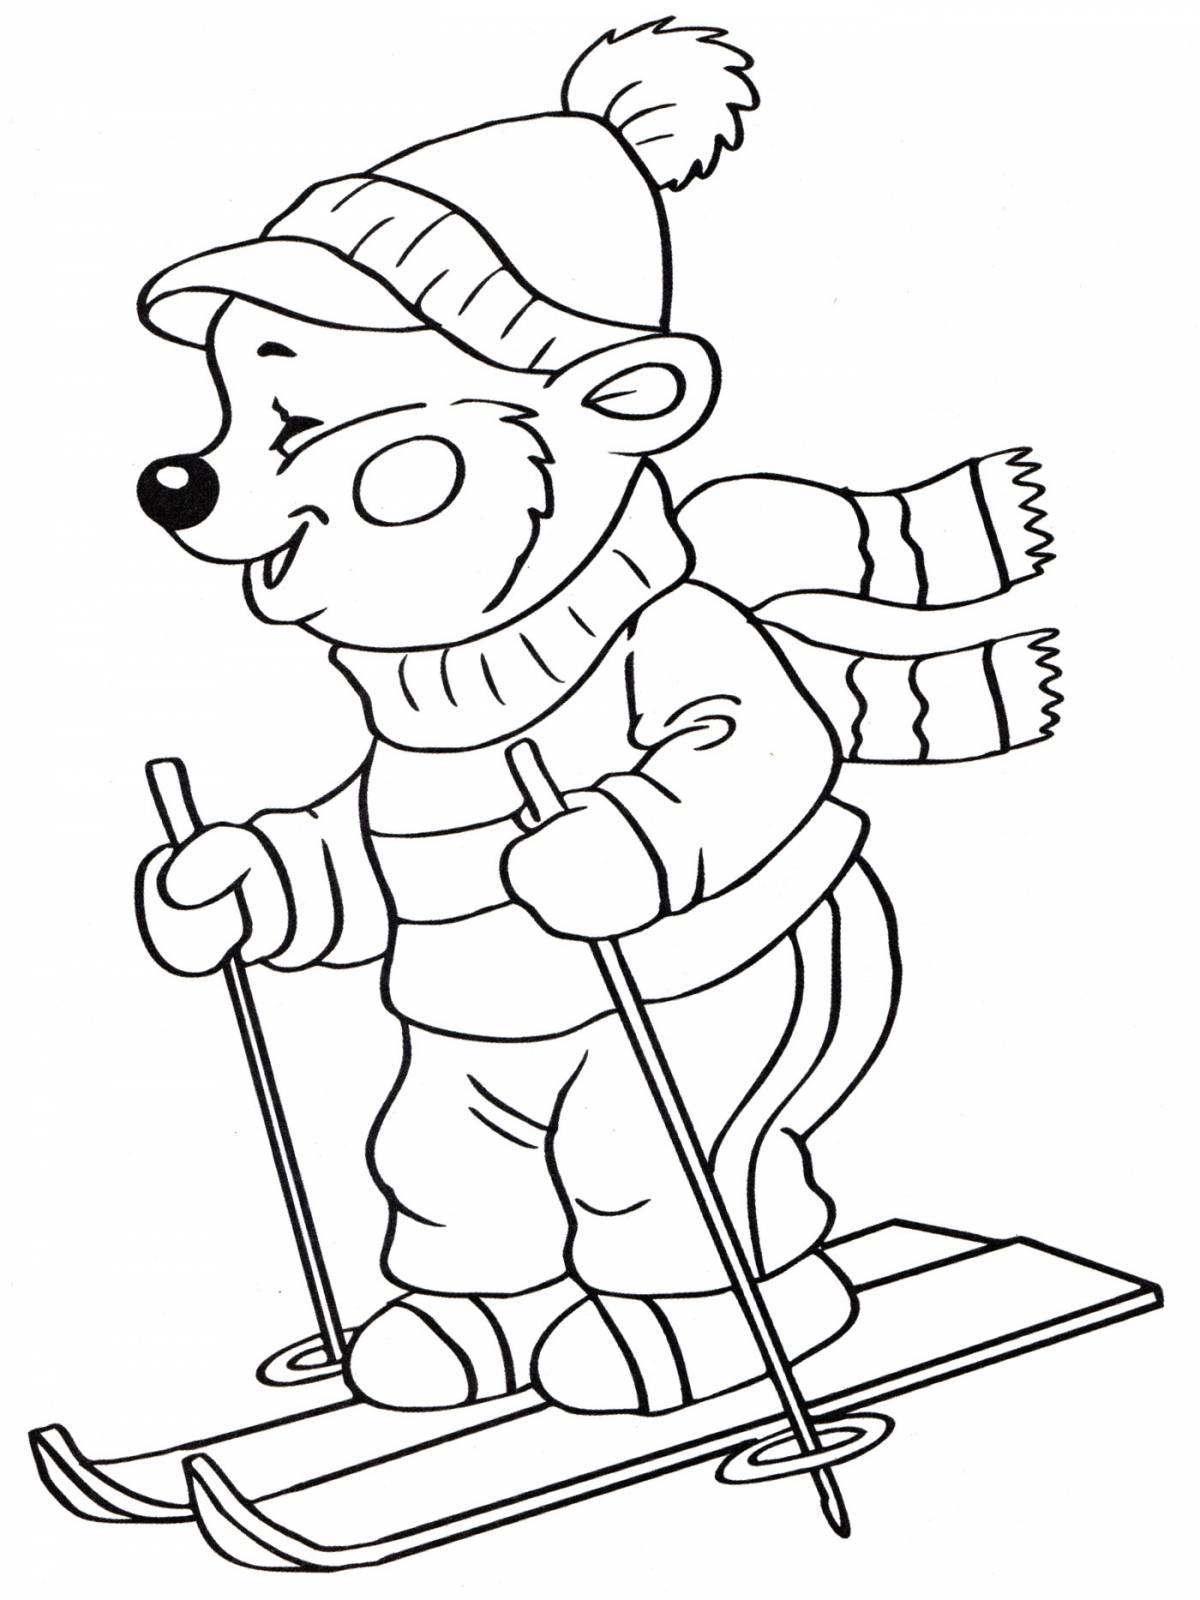 Shiny winter fun coloring book for 3-4 year olds